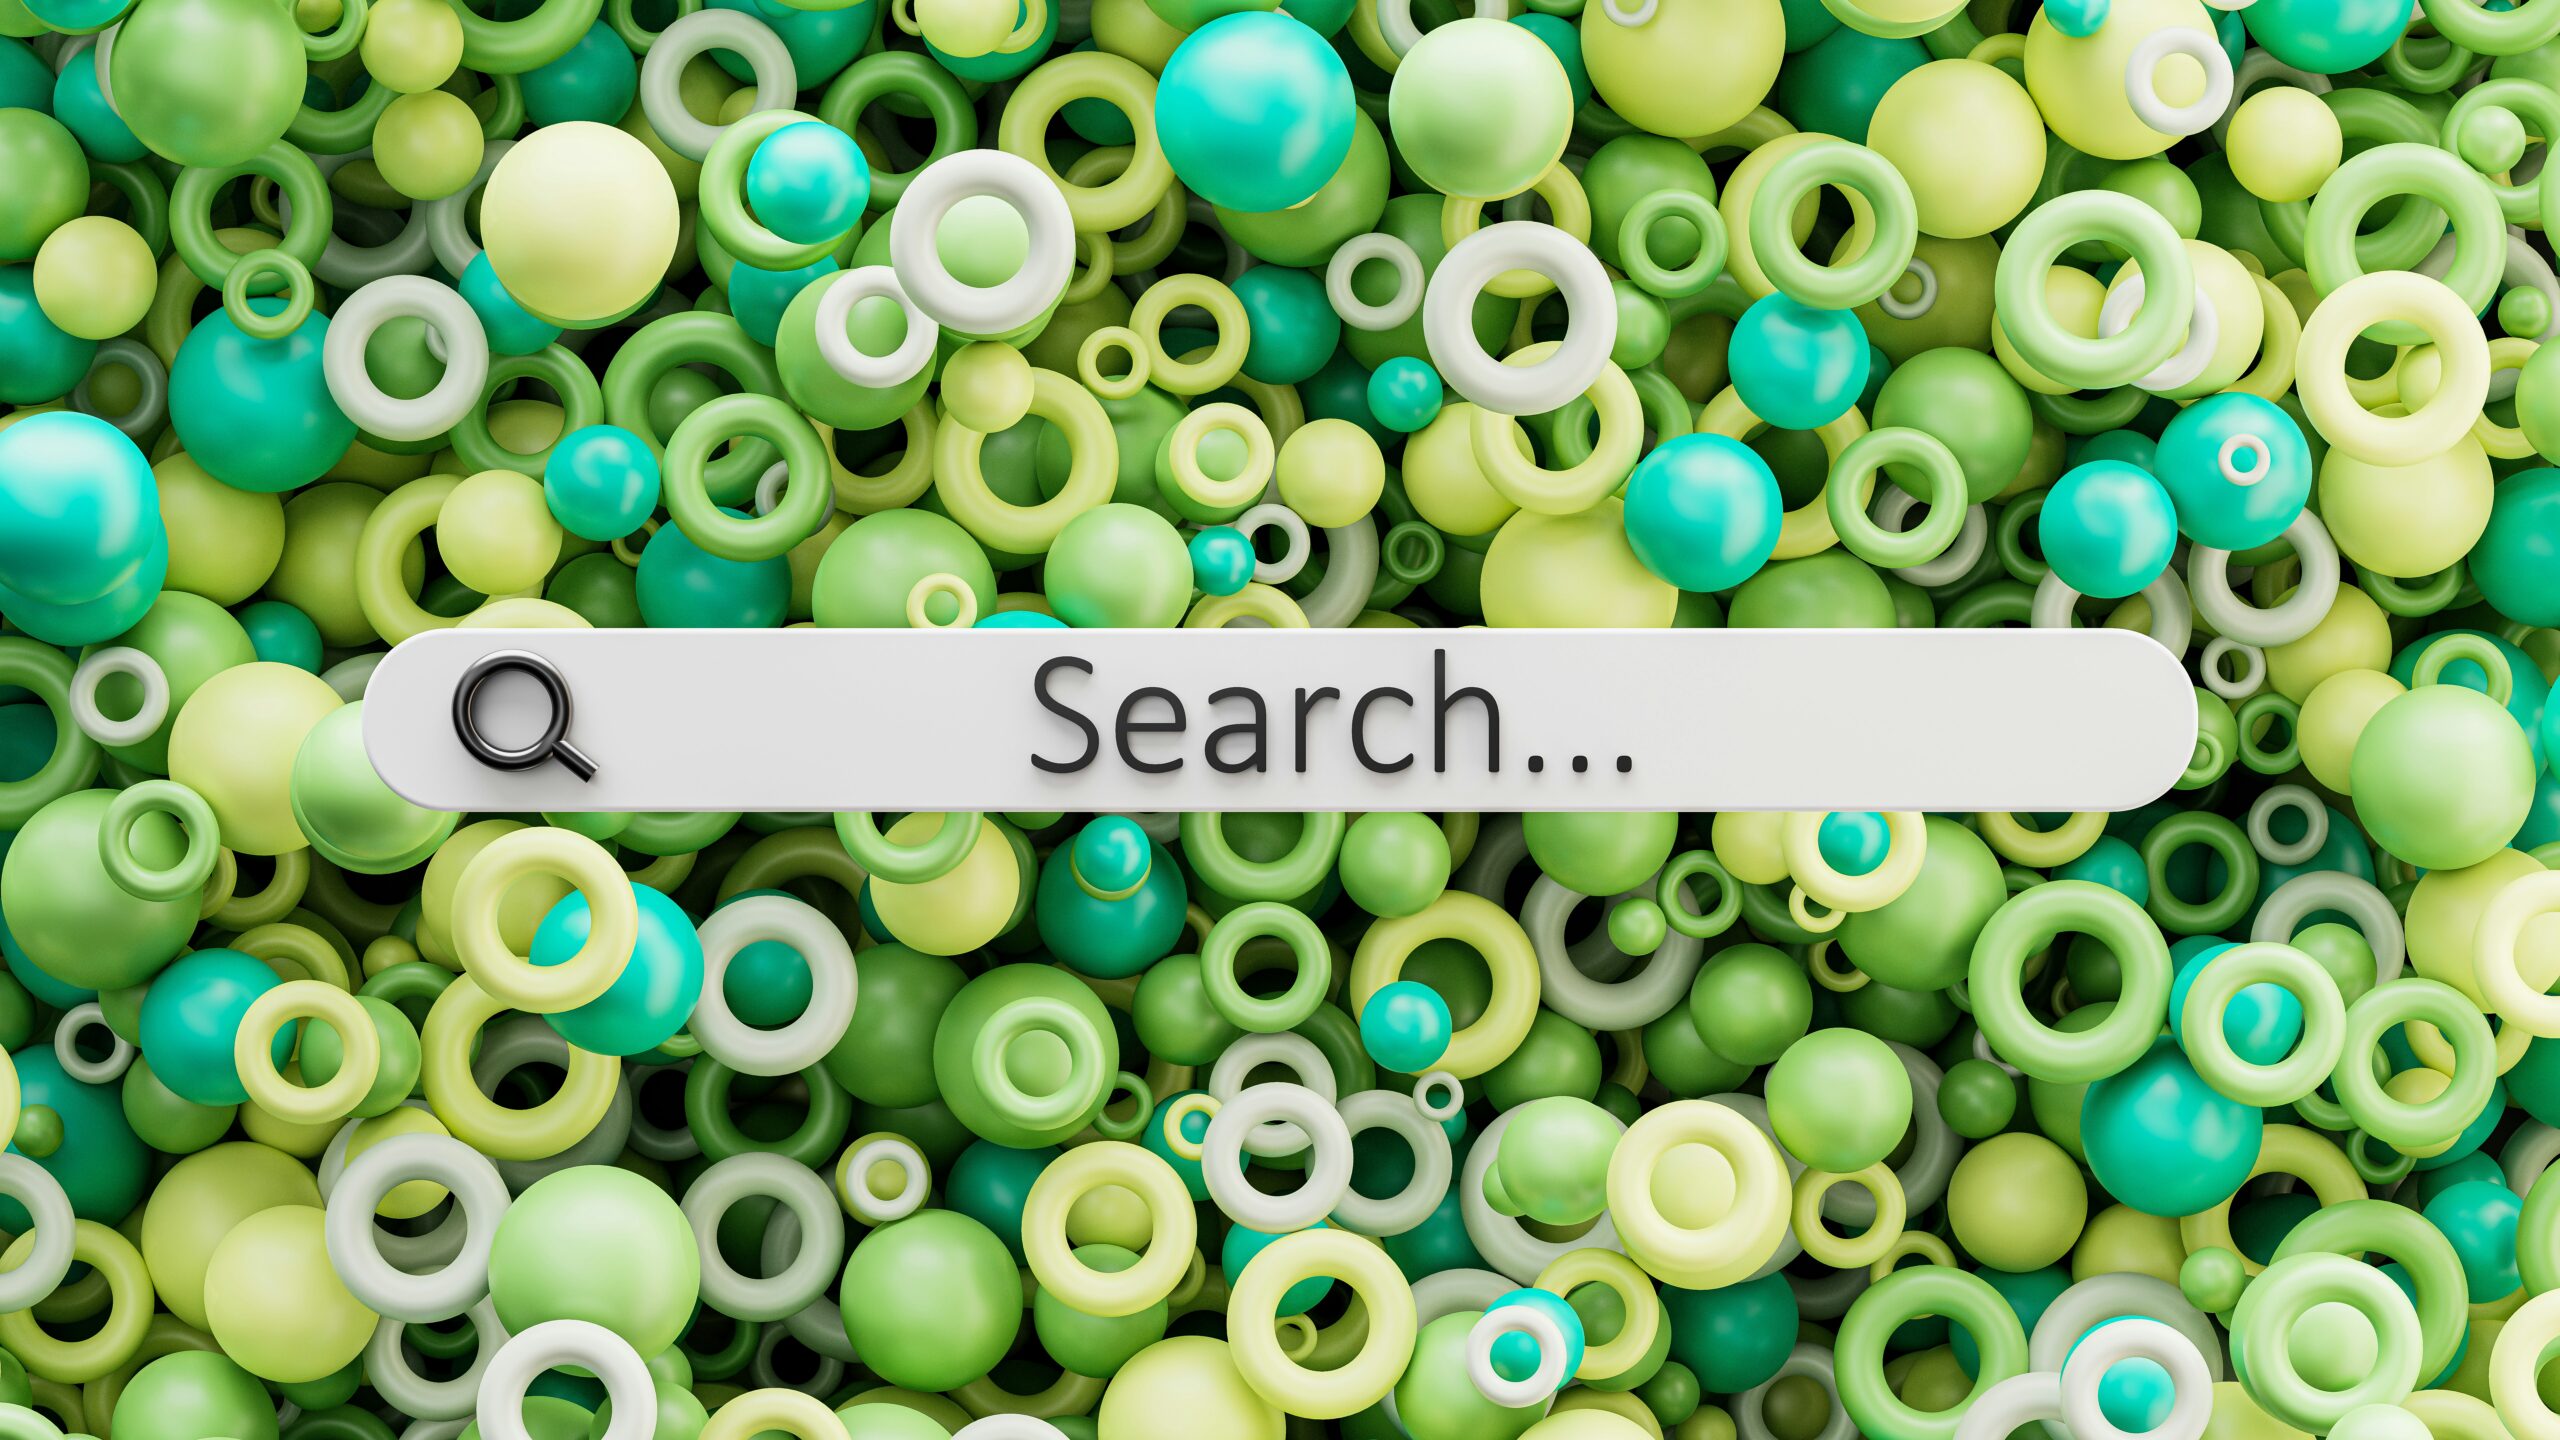 A green background and a search bar in the middle illustrating SEO tips for nonprofits